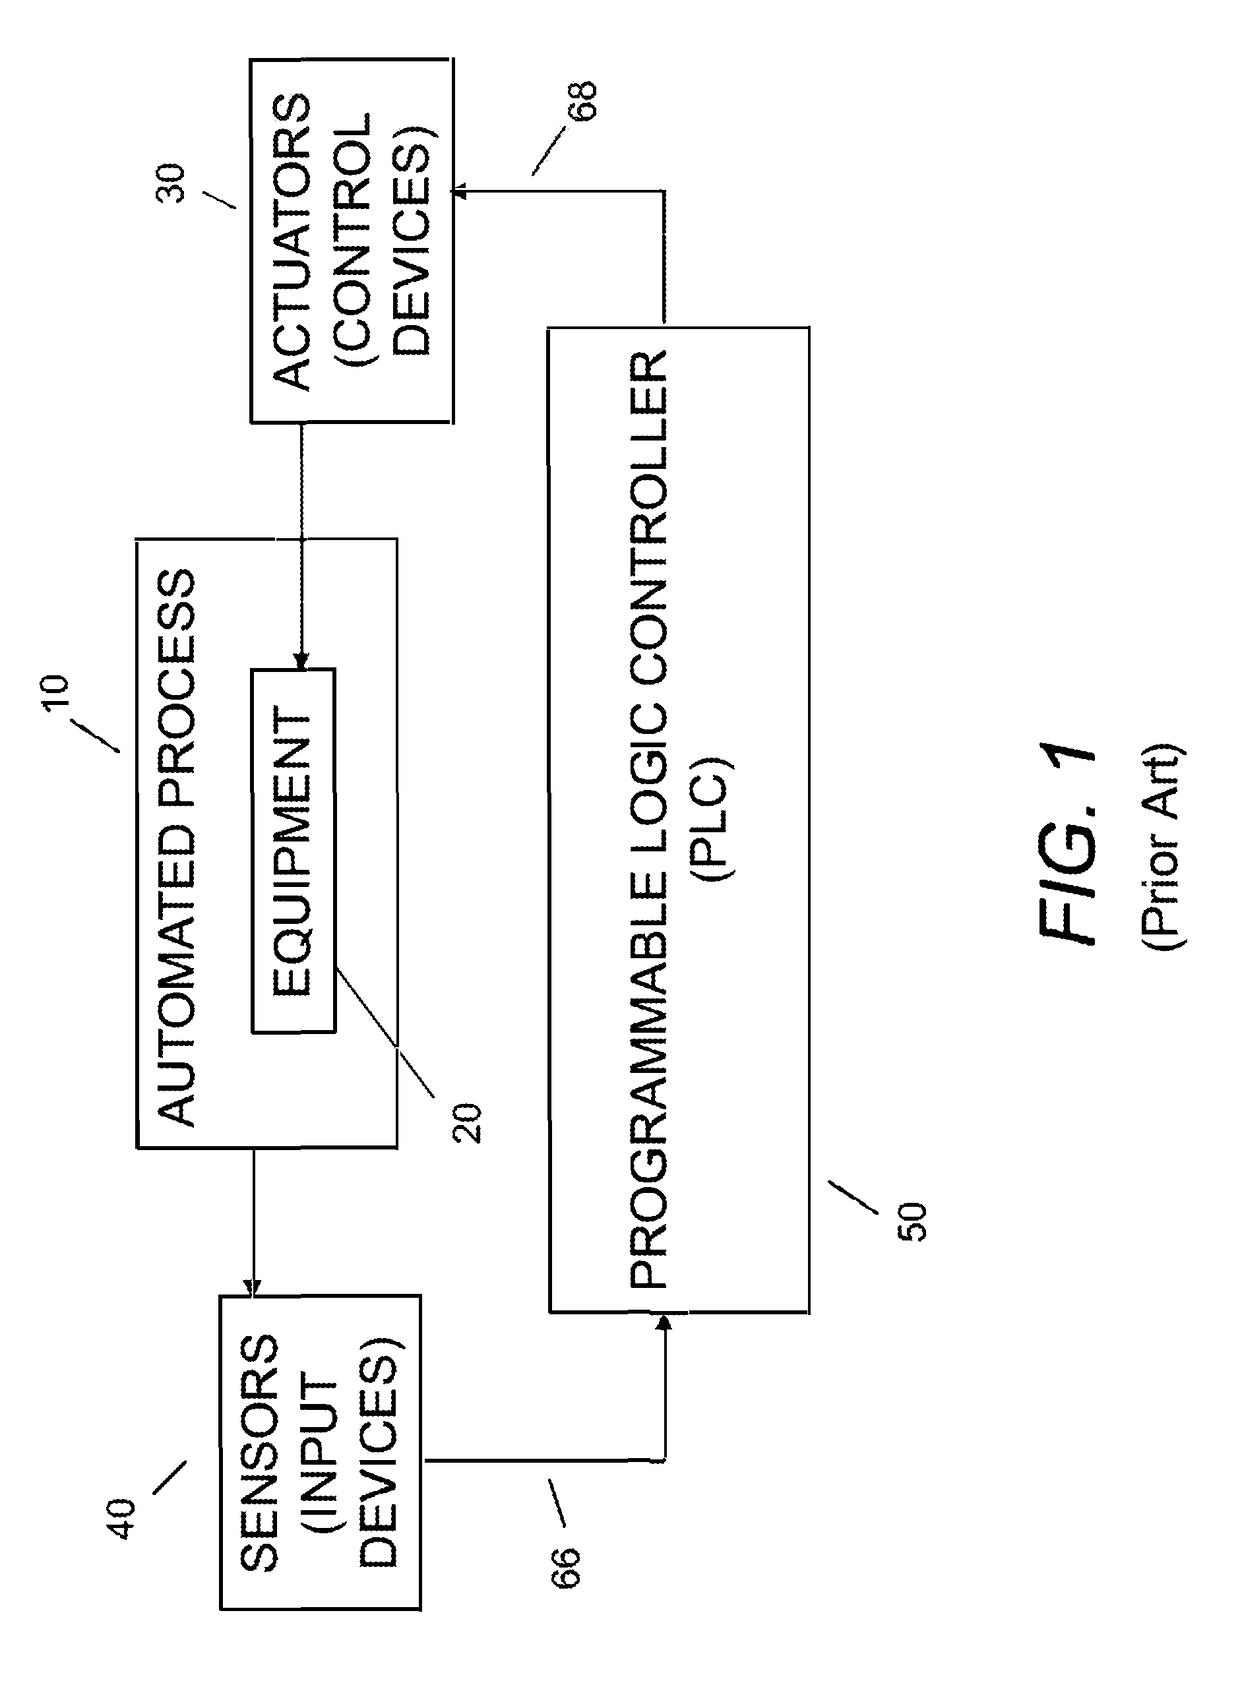 Methods, apparatus, and systems for monitoring and/or controlling dynamic environments